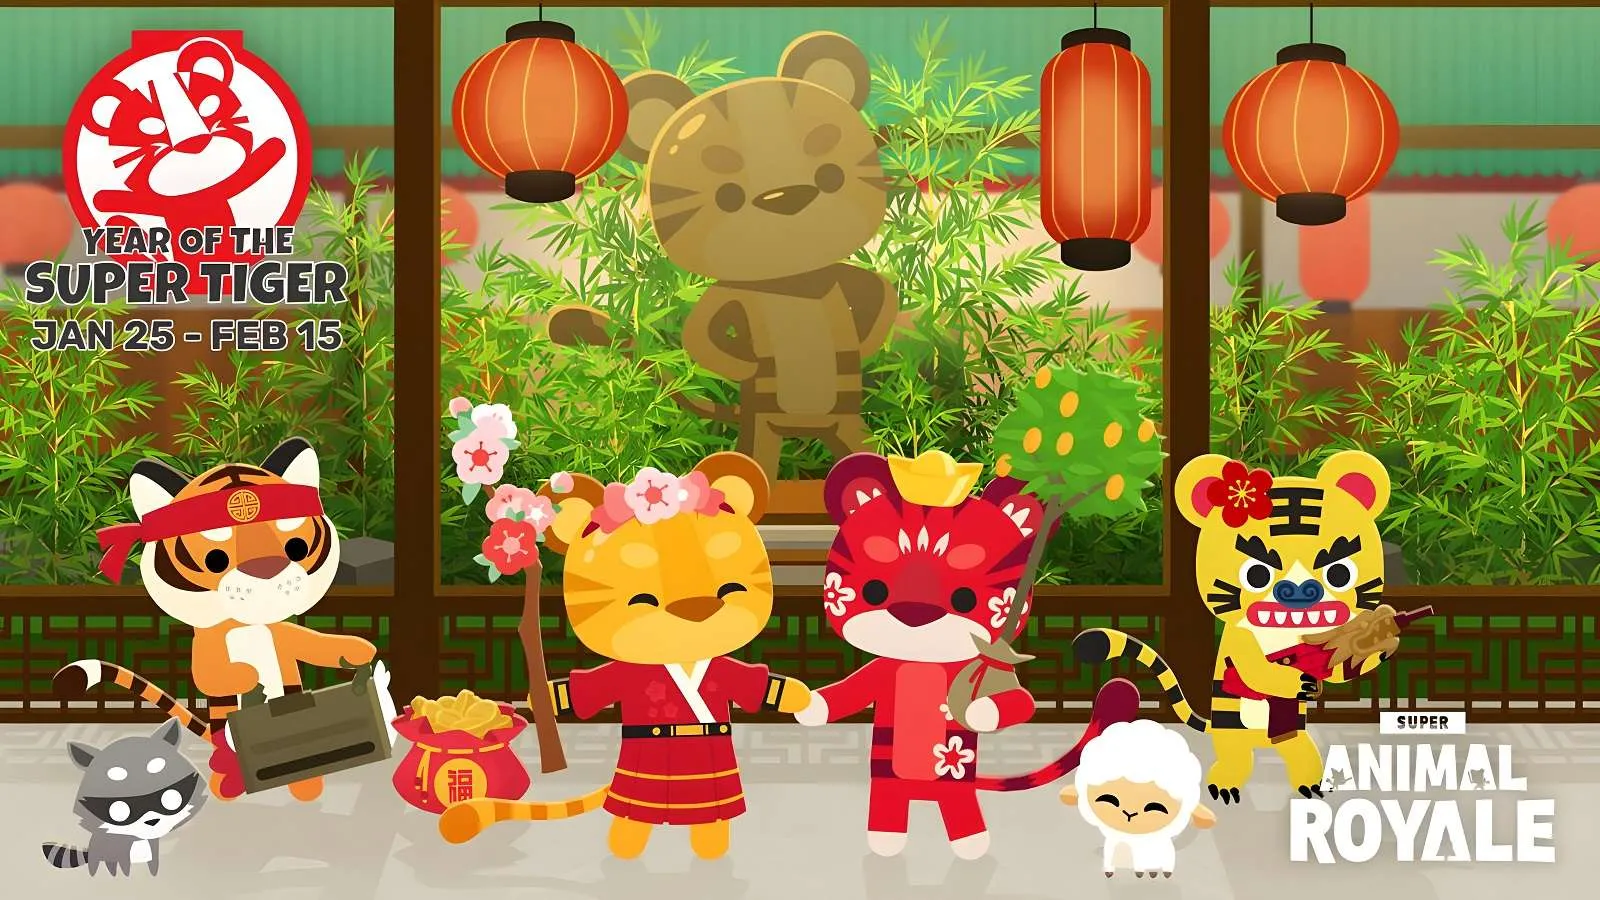 Super Animal Royale kicks off brand new Lunar New Year event - Game Freaks  365